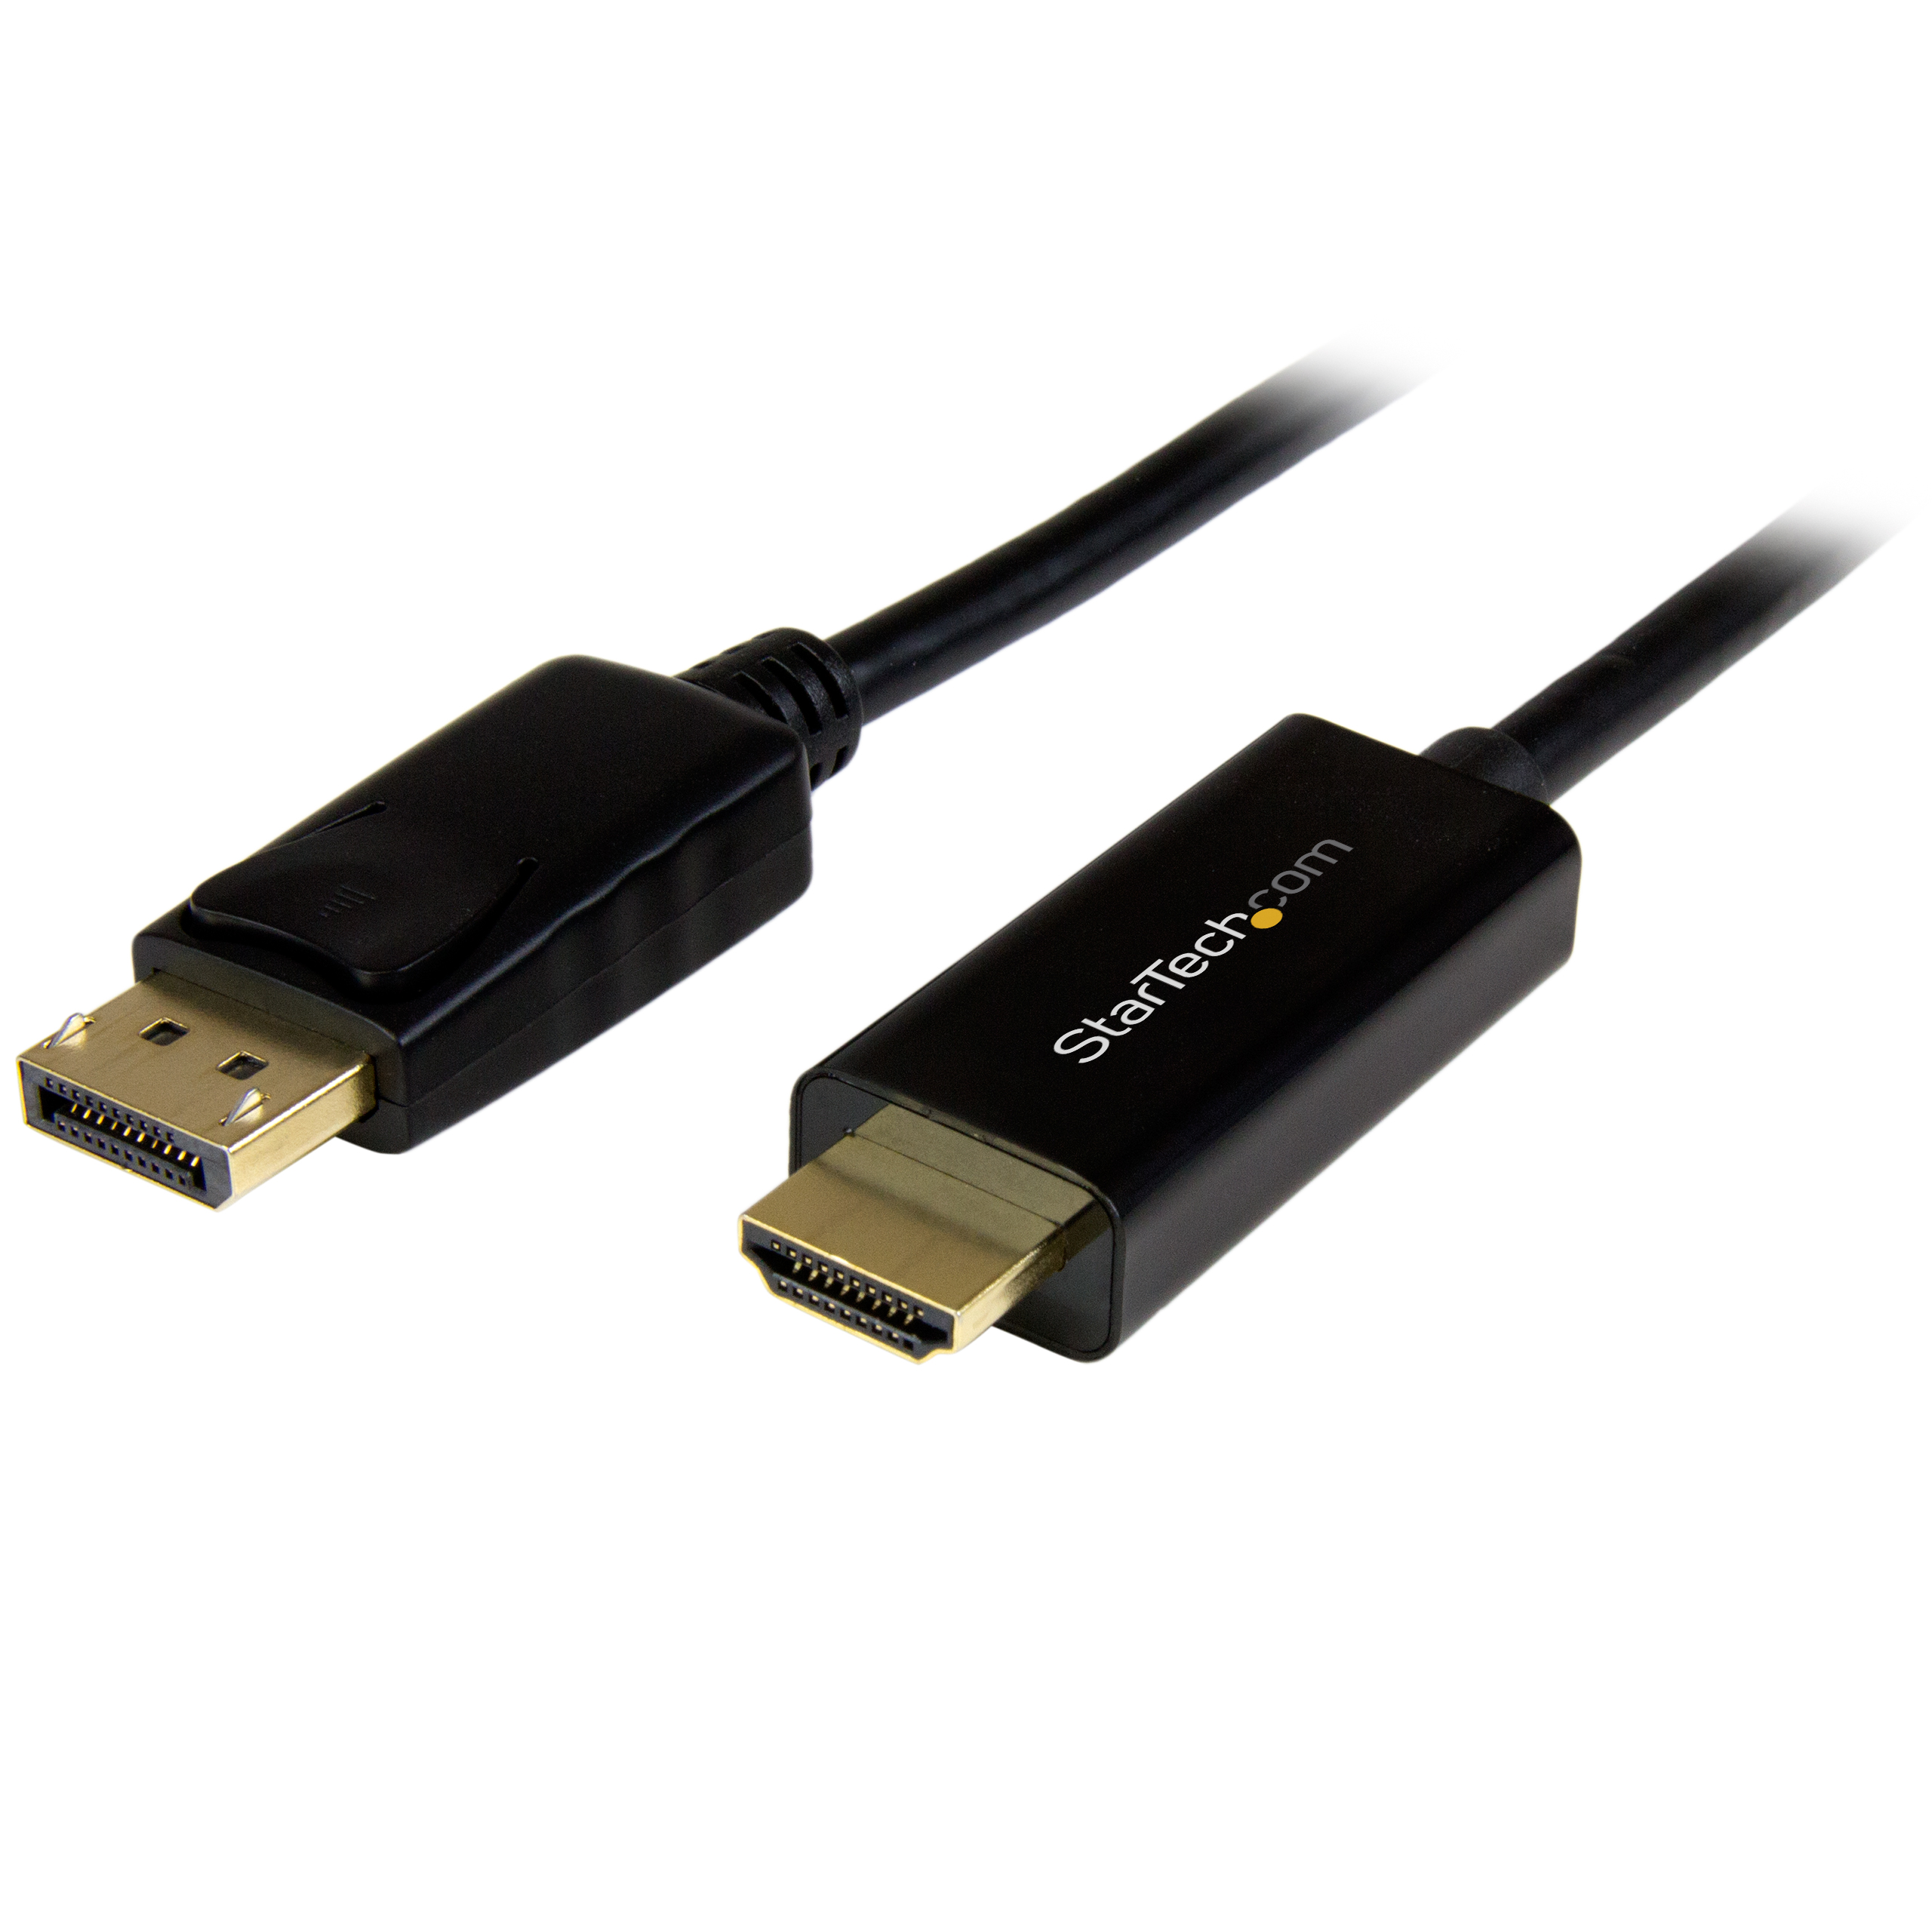 6.5 ft / 2m DisplayPort to HDMI converter cable - (DP2HDMM2MB) video cable 2 m | Dell Australia